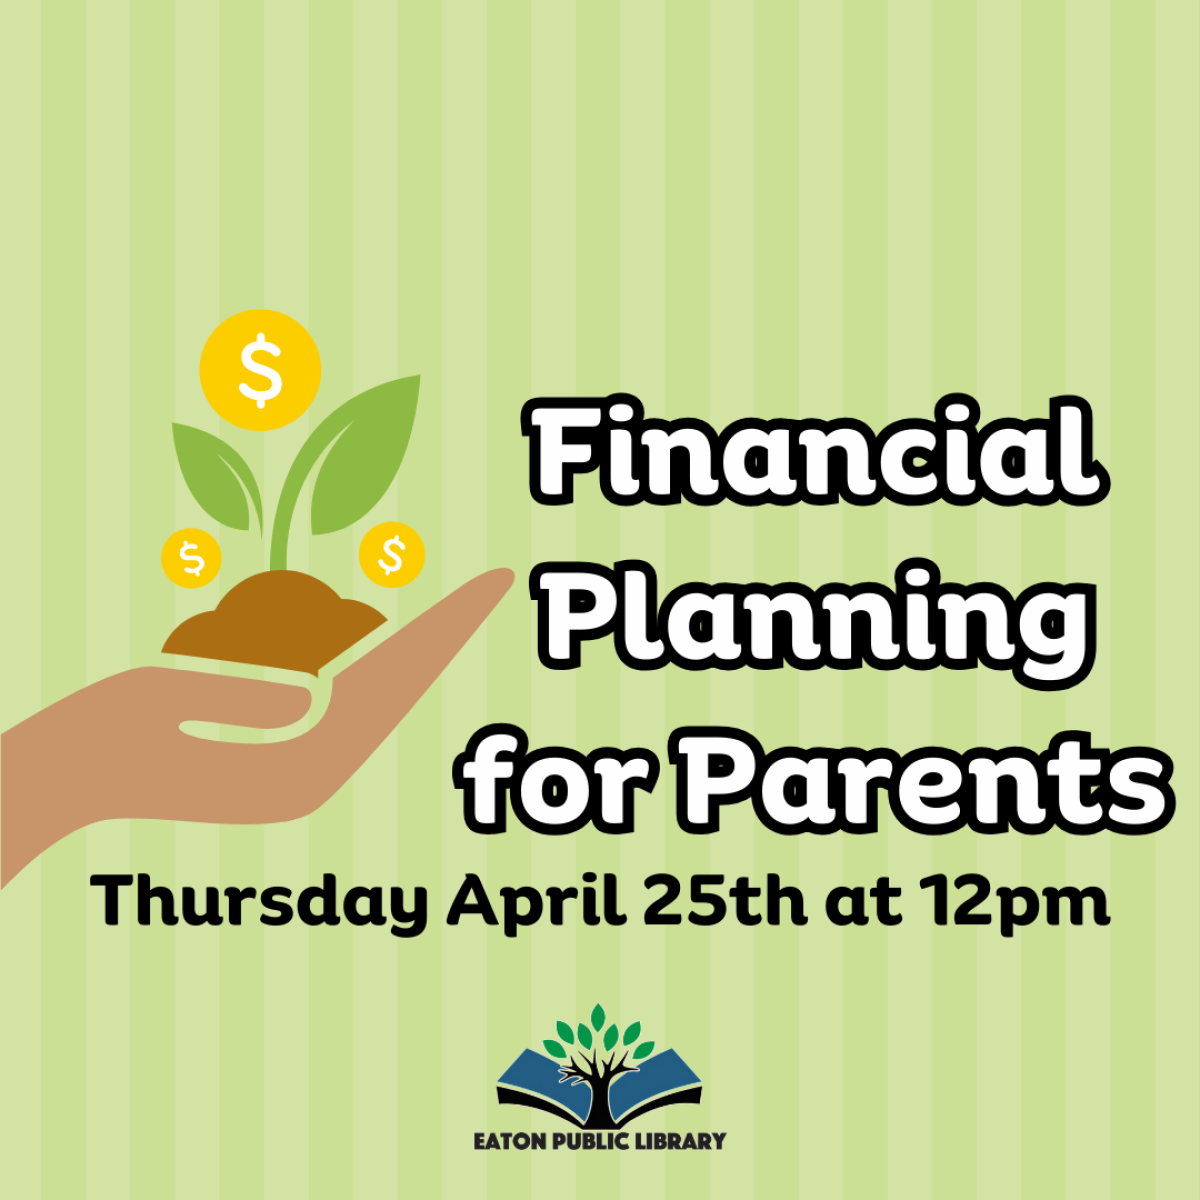 Financial Planning for Parents April 25th at 12pm